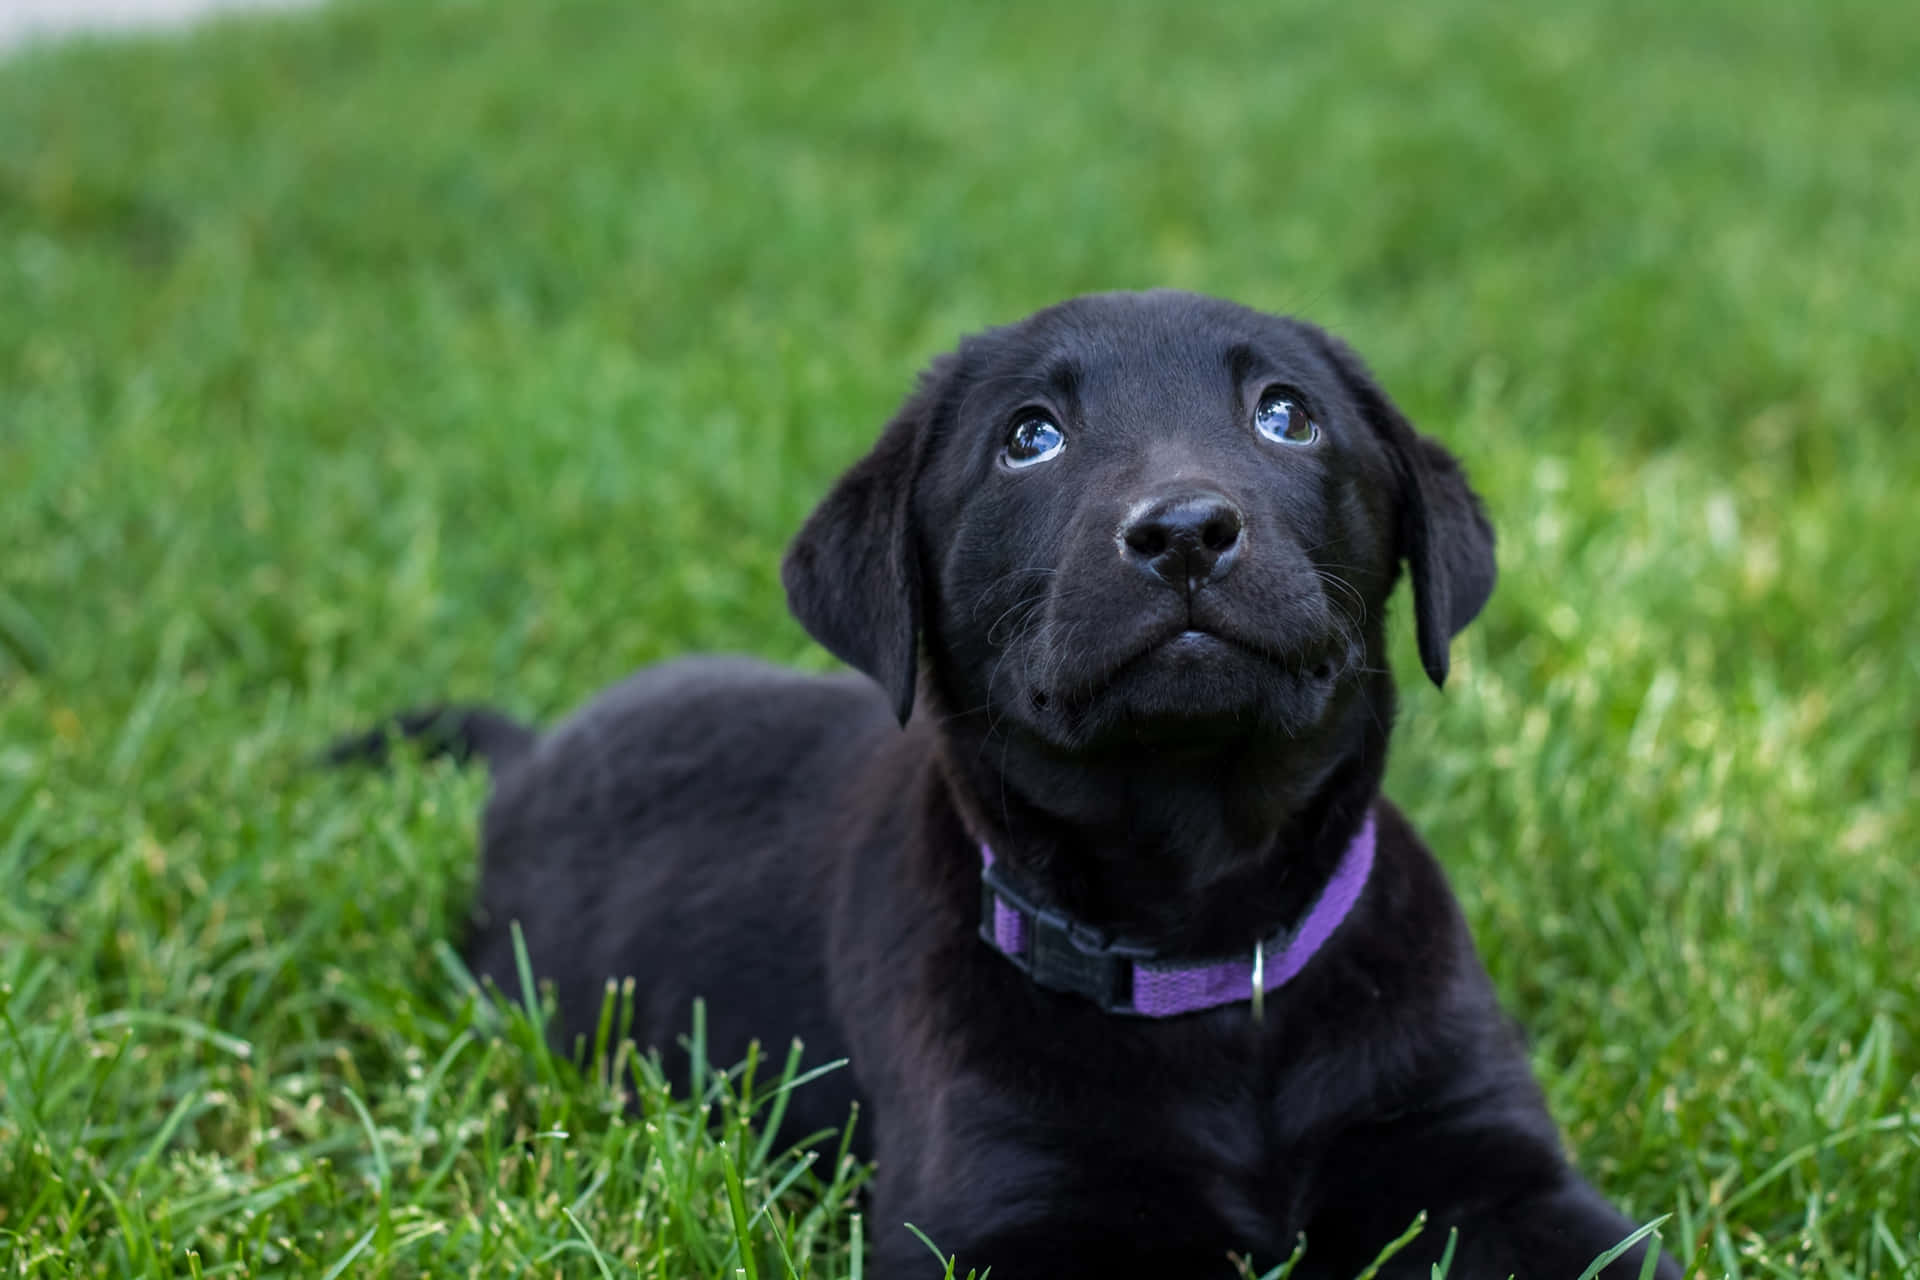 Playful Black Lab Puppies Frolicking Outdoors.